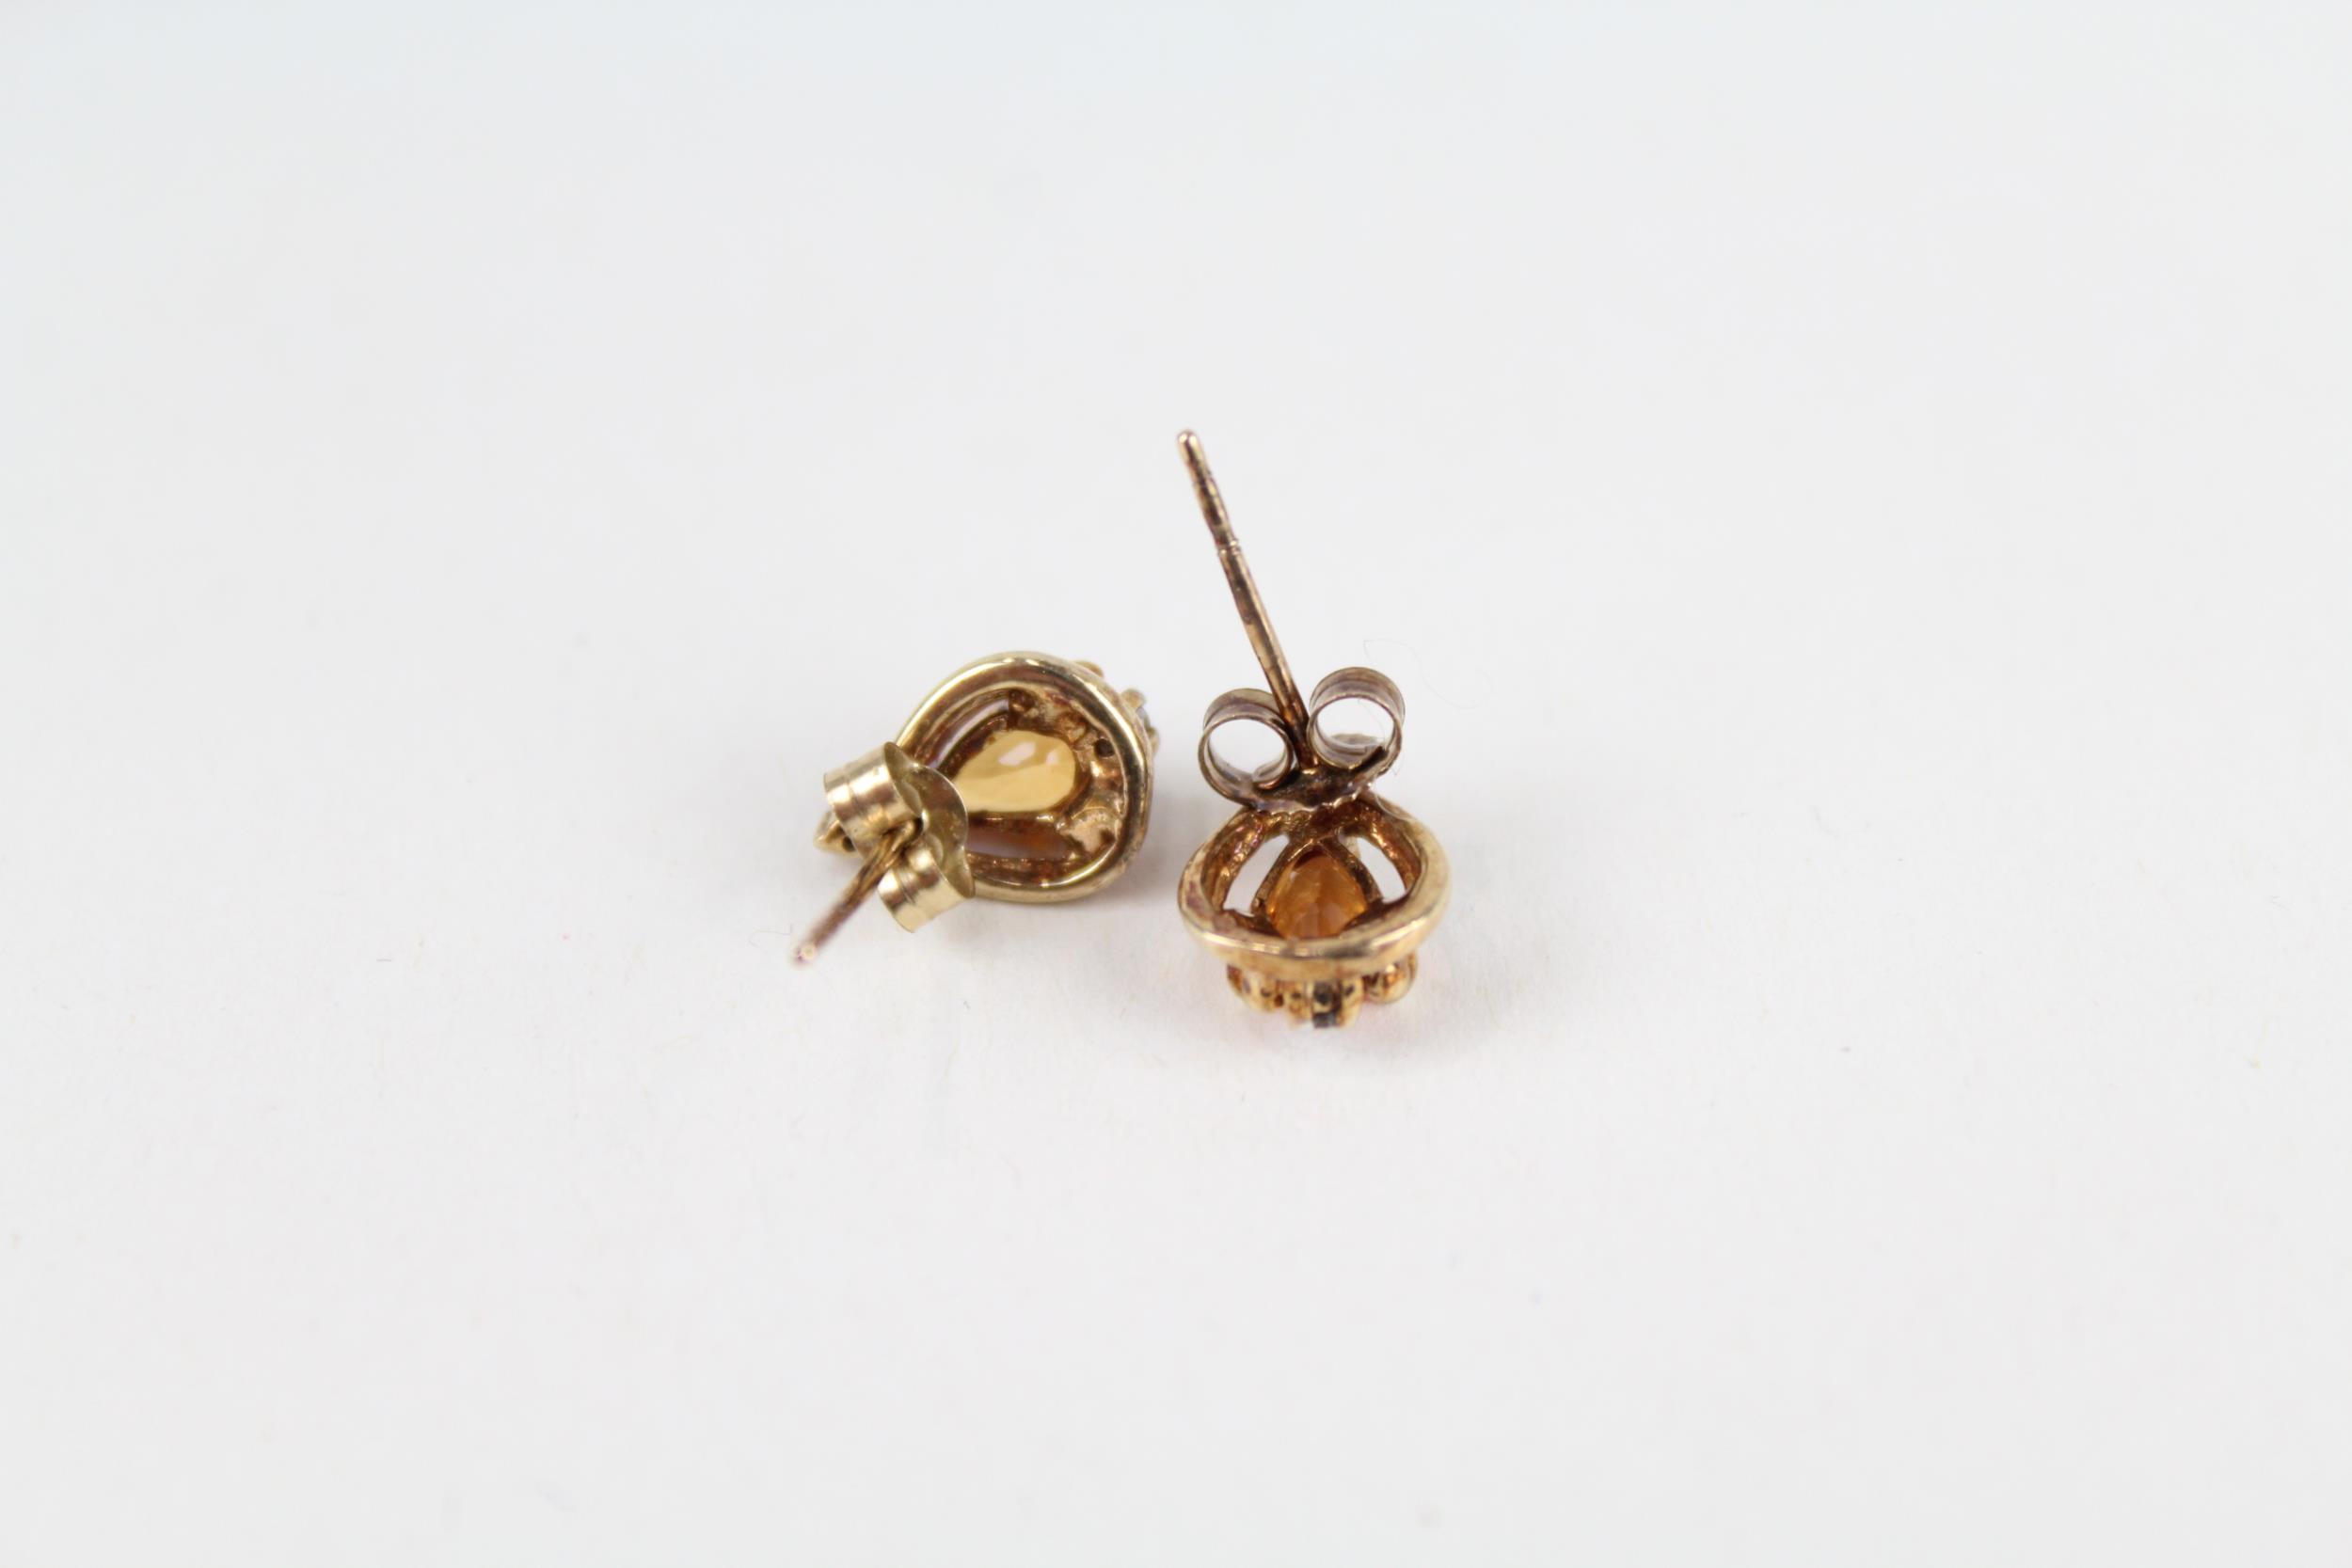 9ct gold pear cut yellow gemstone & white sapphire stud earrings with scroll backs - Image 4 of 4